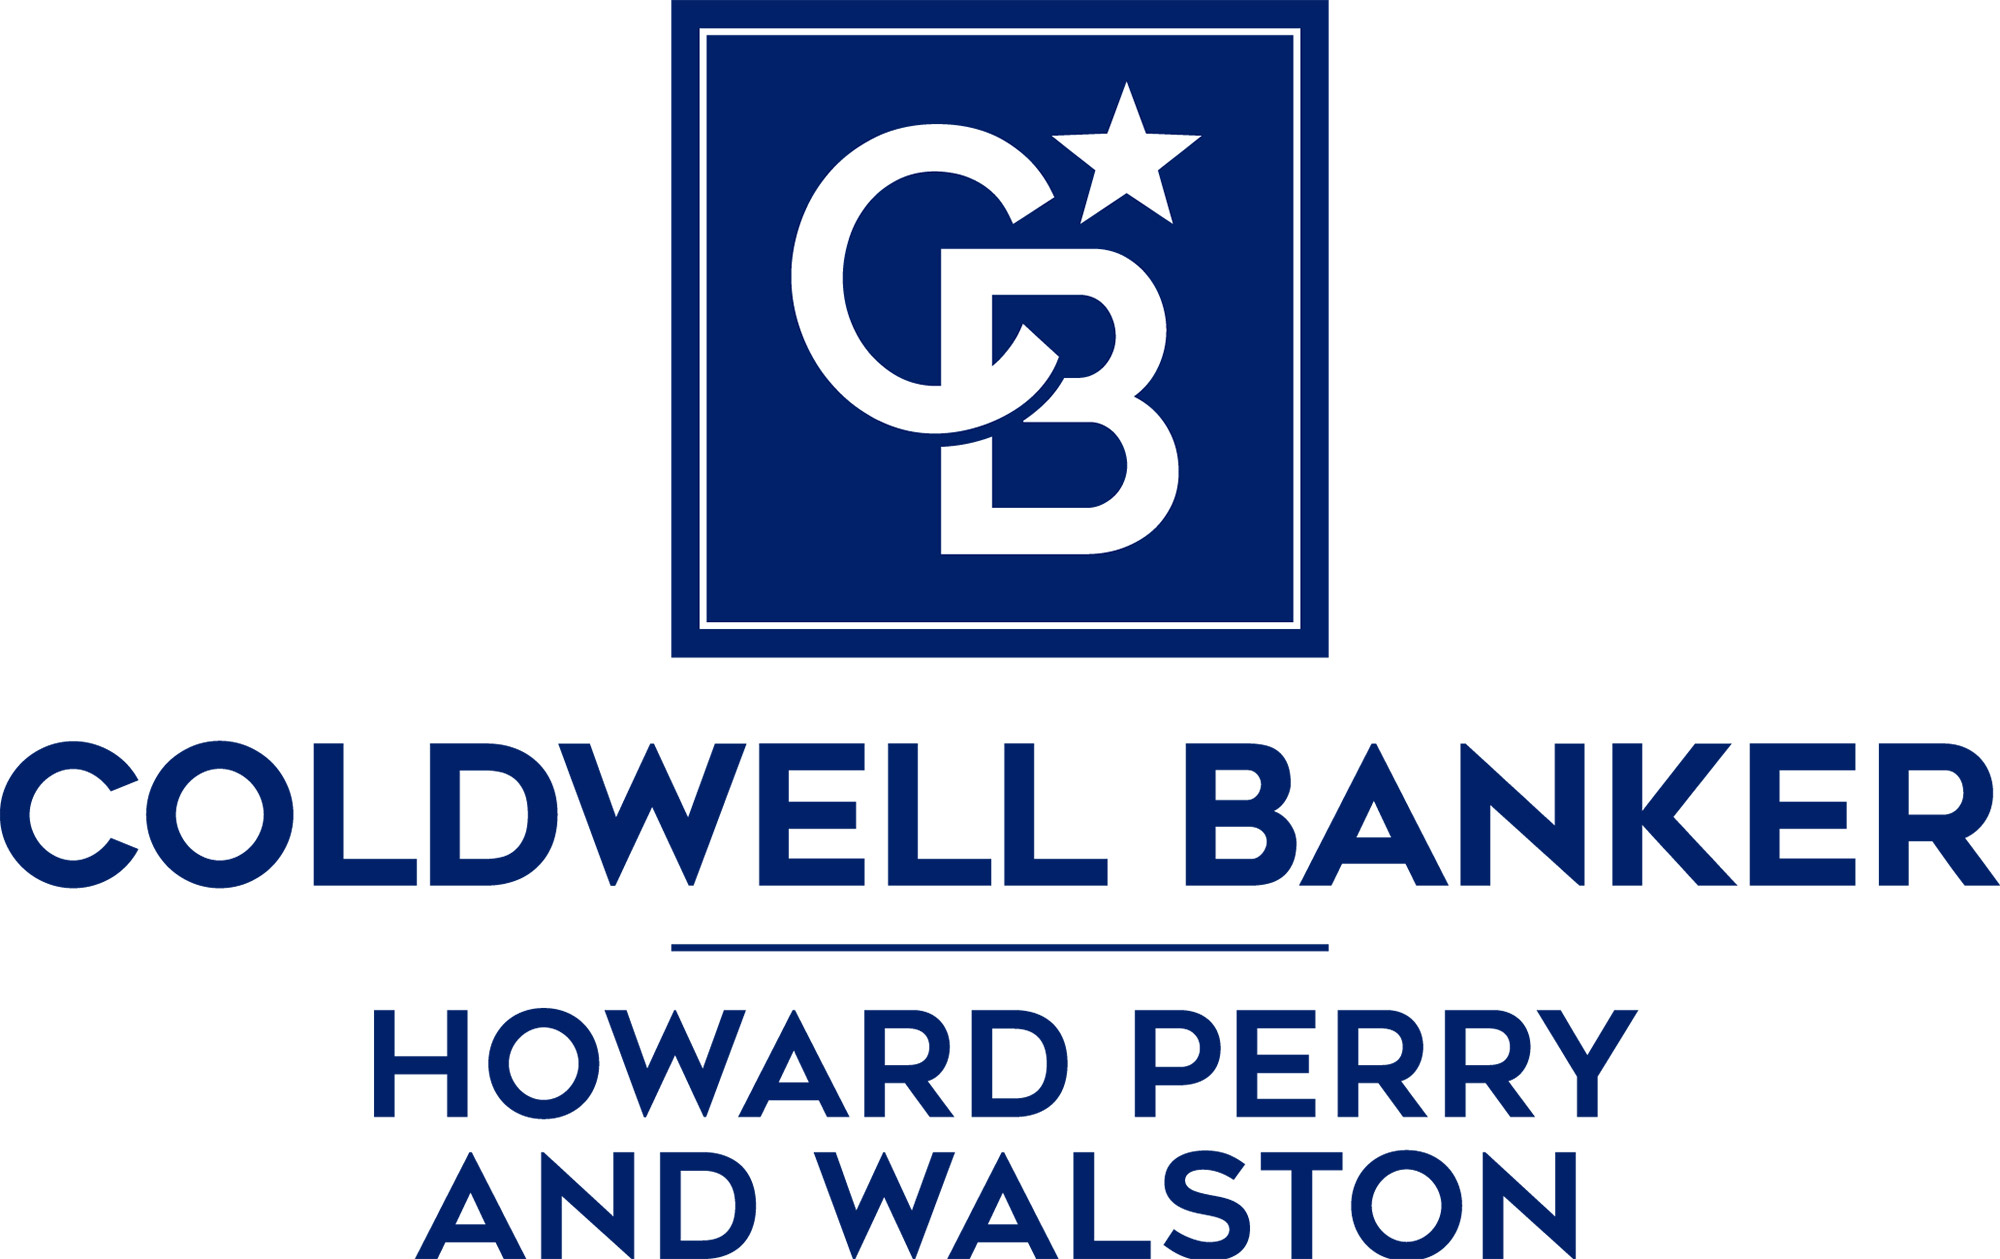 Coldwell Banker Howard Perry and Walston Names Rachael Elliott as Sales Office Manager and Broker-in-Charge of Its Pittsboro Real Estate Sales Office